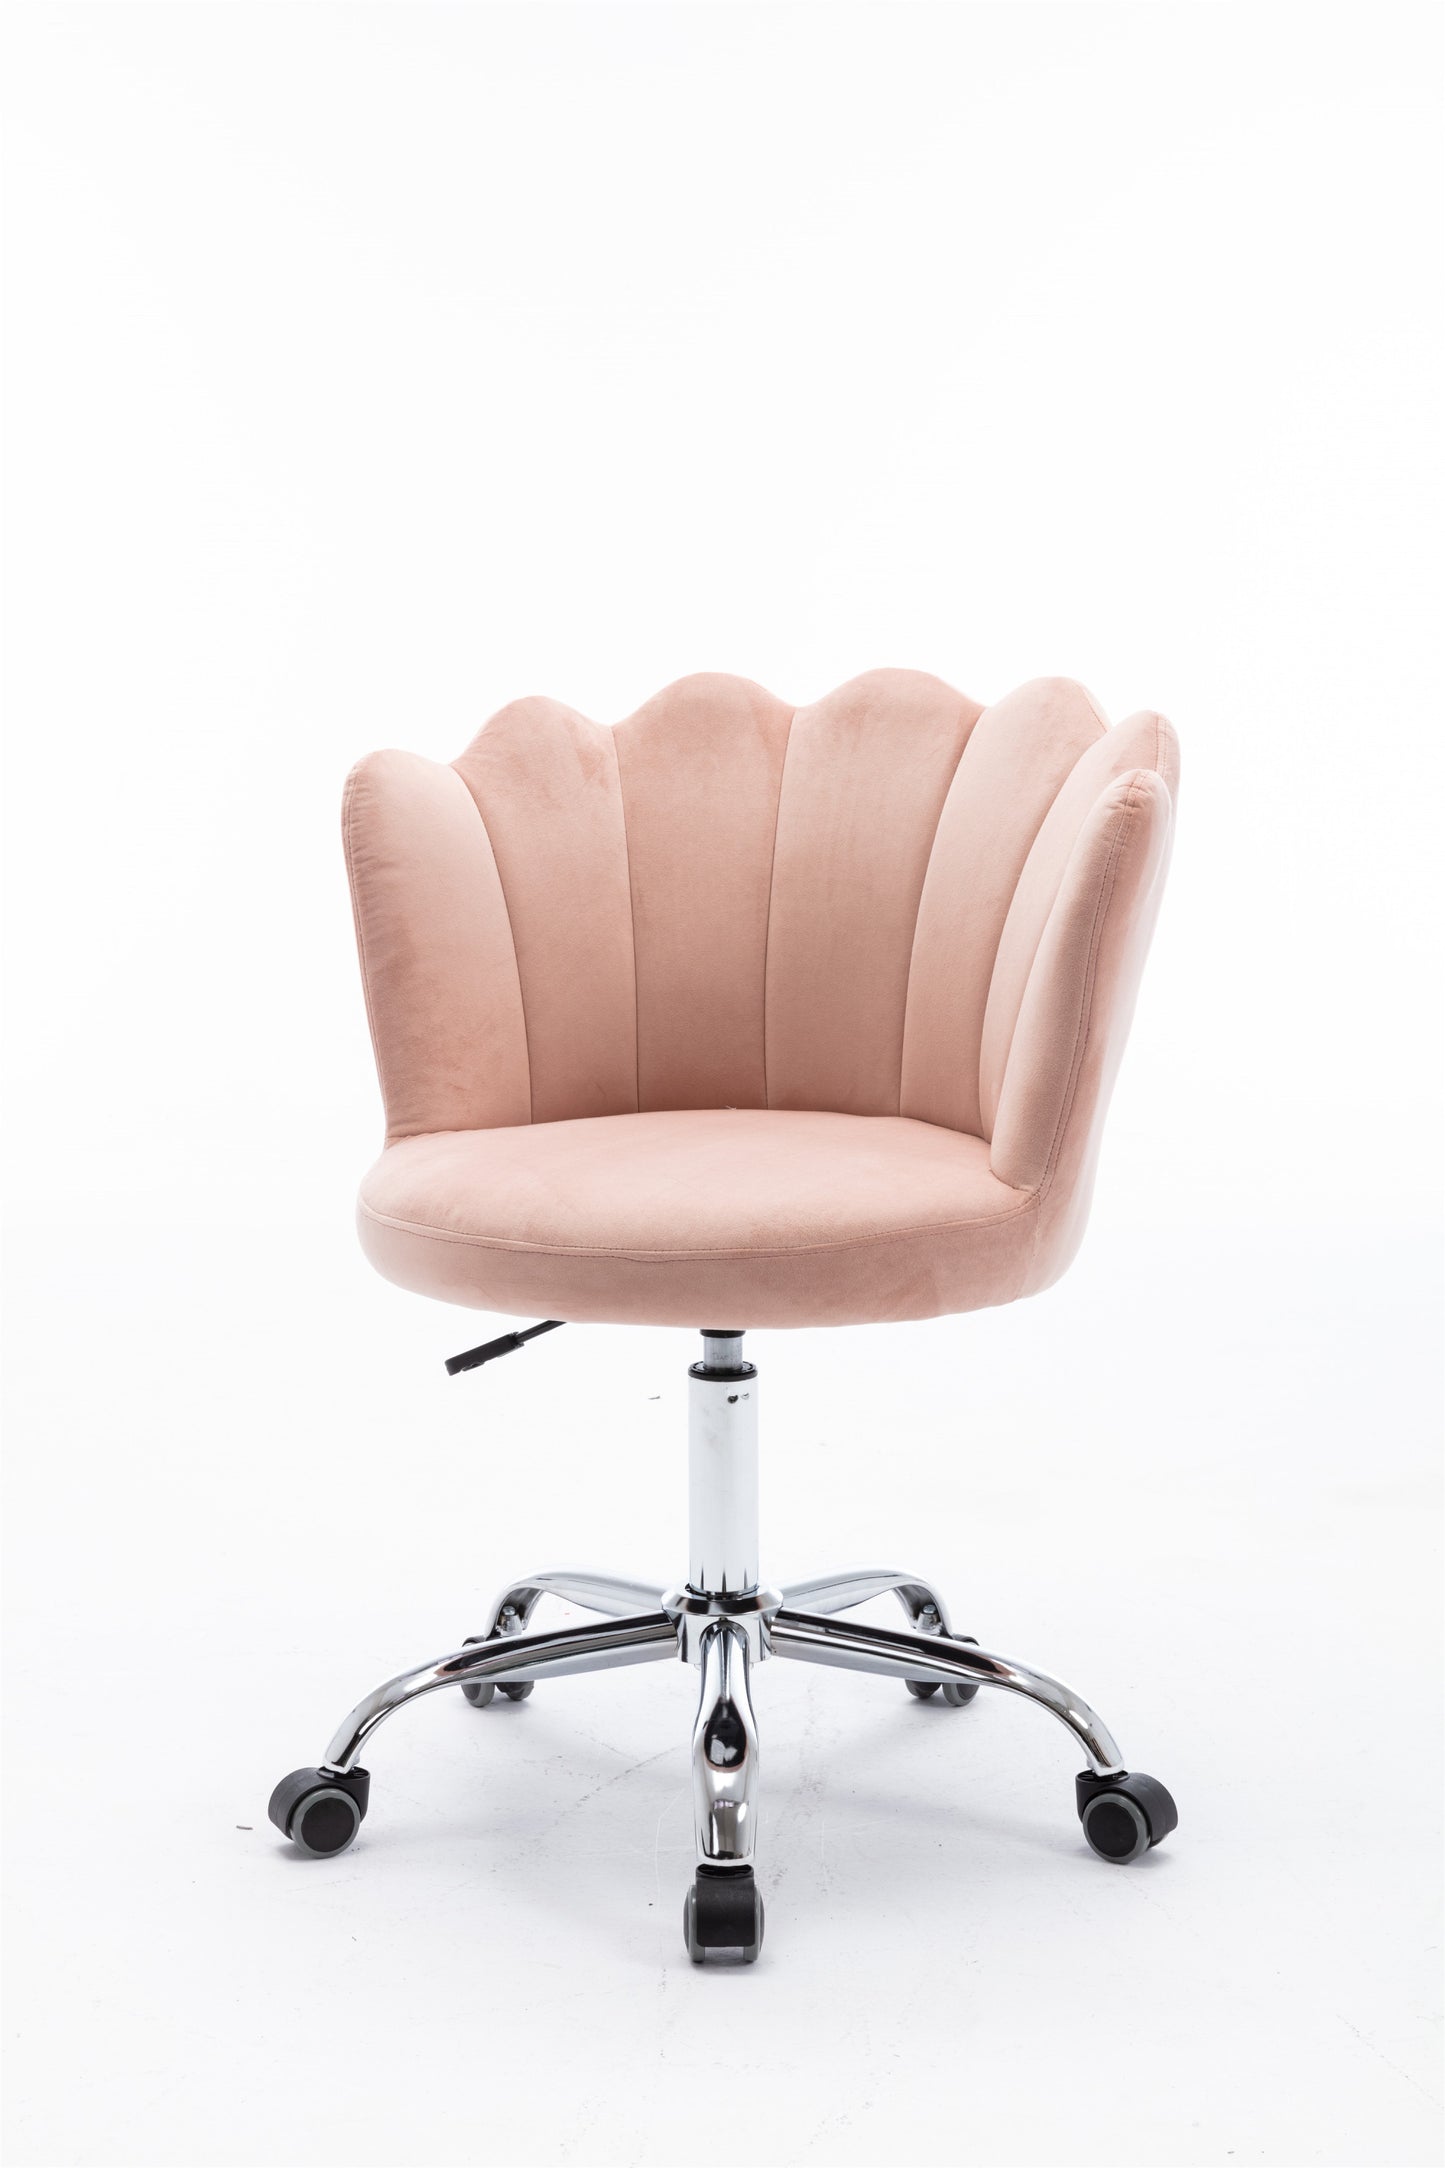 Swivel Shell Chair for Living Room/Bed Room, Modern Leisure office Chair Pink